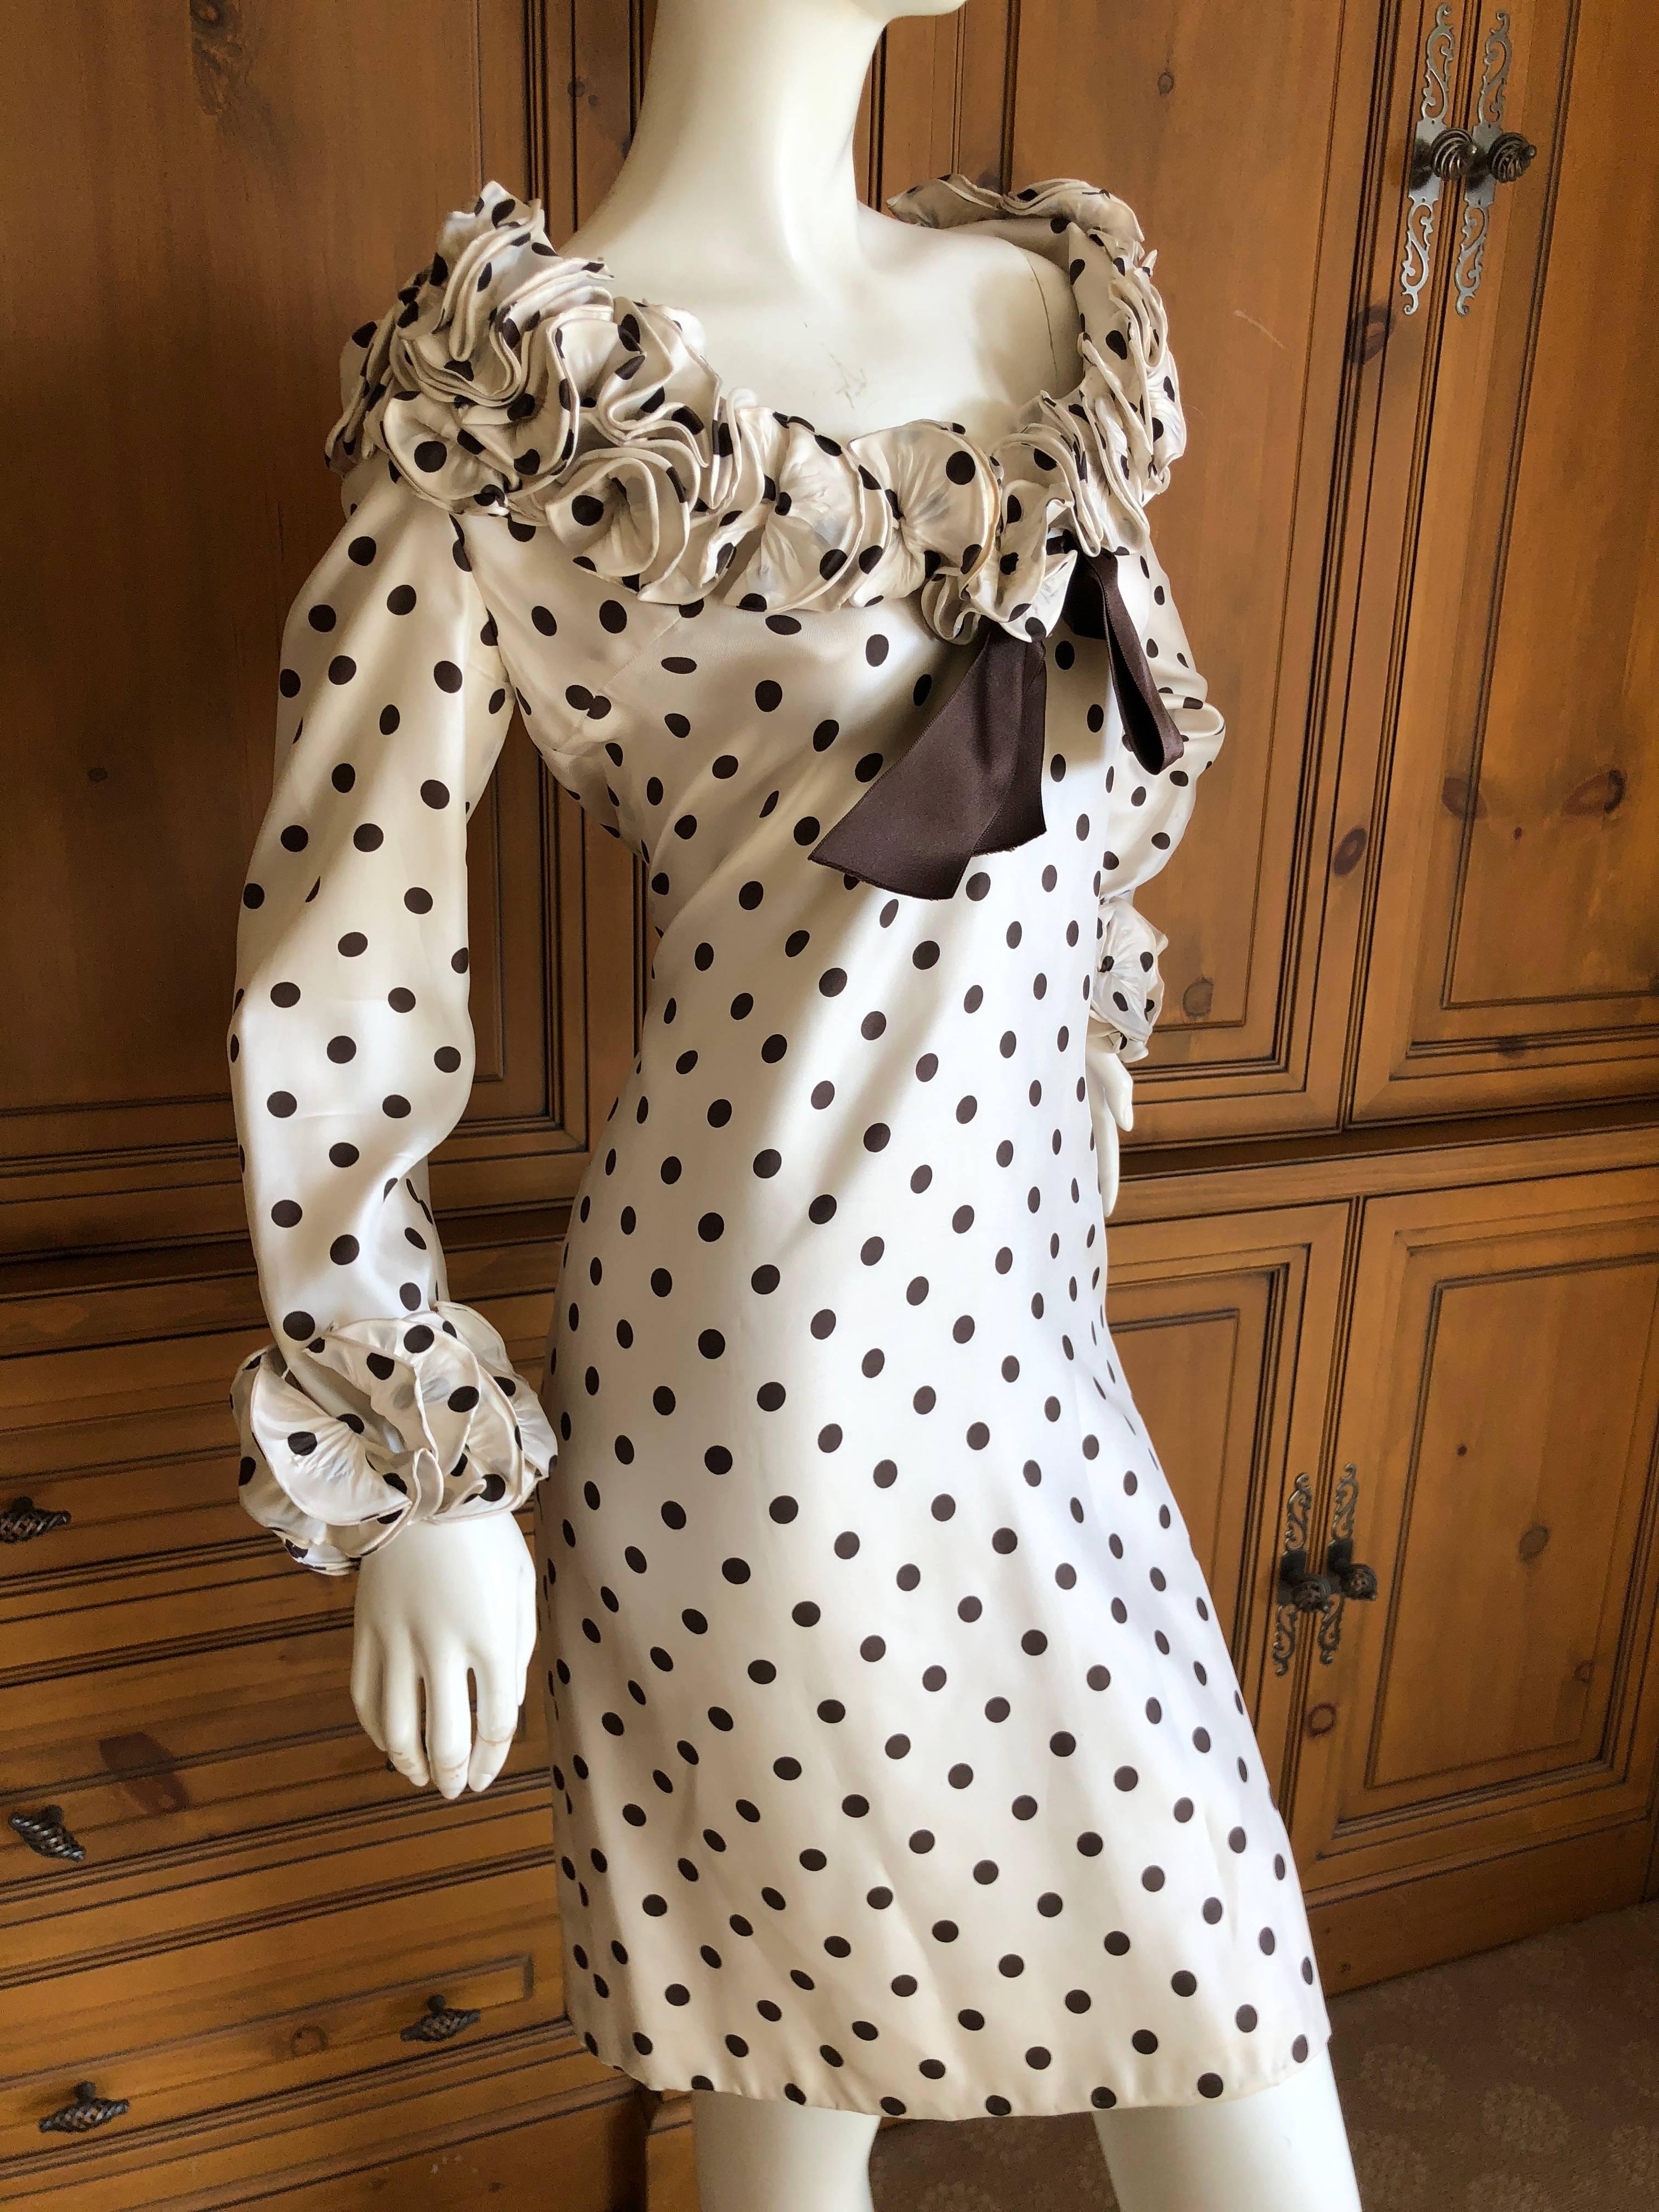 Pierre Balmain Haute Couture 1968 Polka Dot Ruffled Silk Dress In Good Condition For Sale In Cloverdale, CA